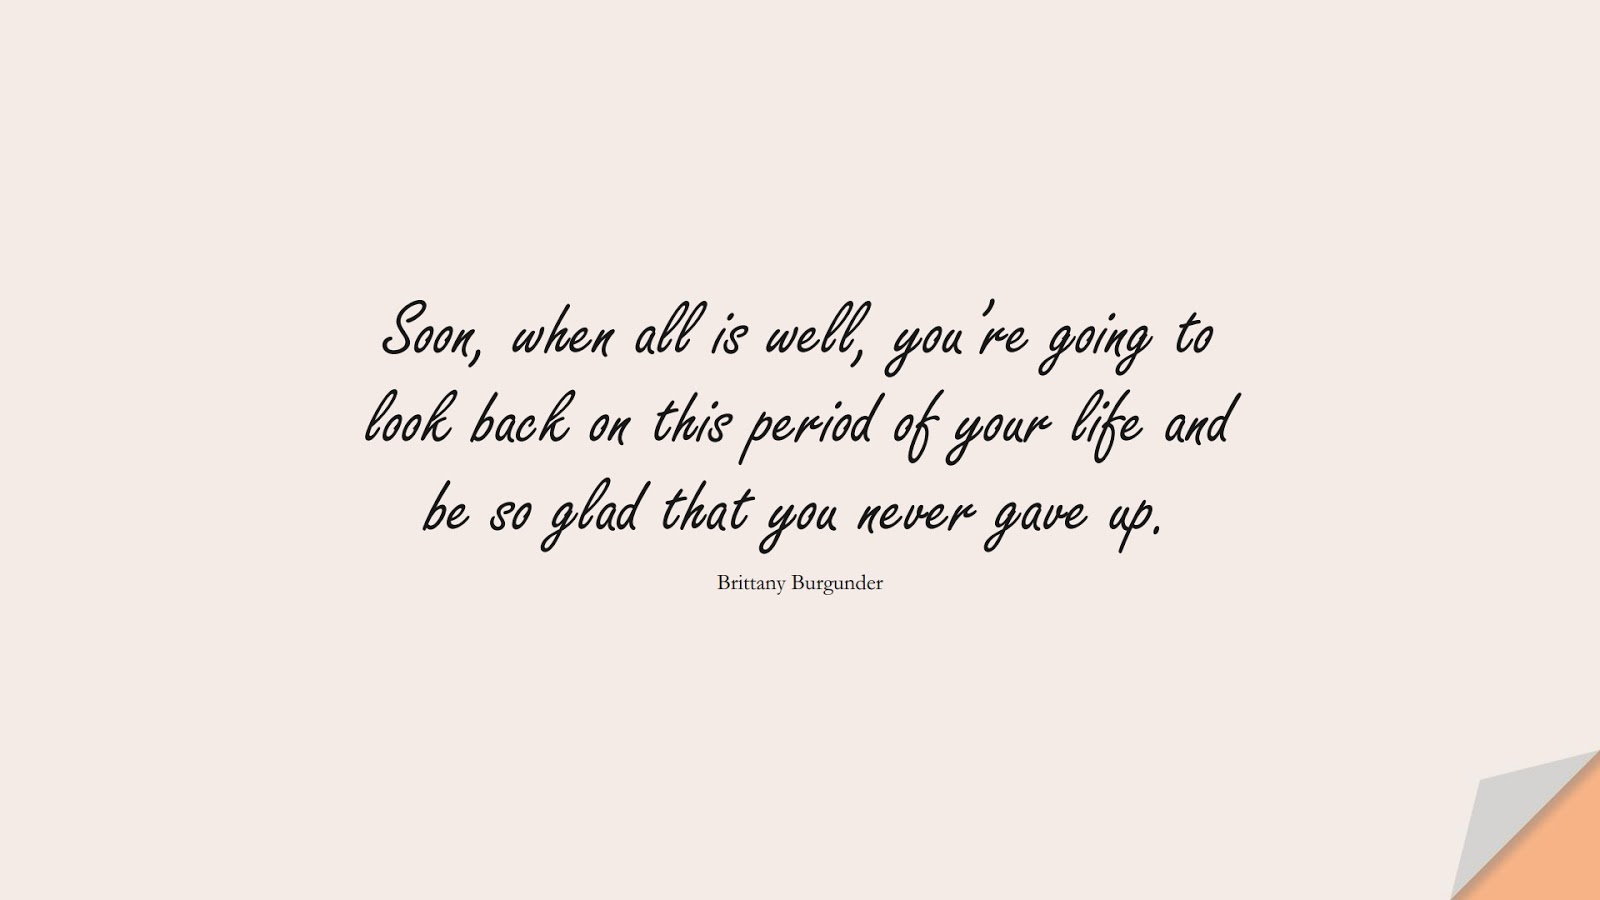 Soon, when all is well, you’re going to look back on this period of your life and be so glad that you never gave up. (Brittany Burgunder);  #EncouragingQuotes